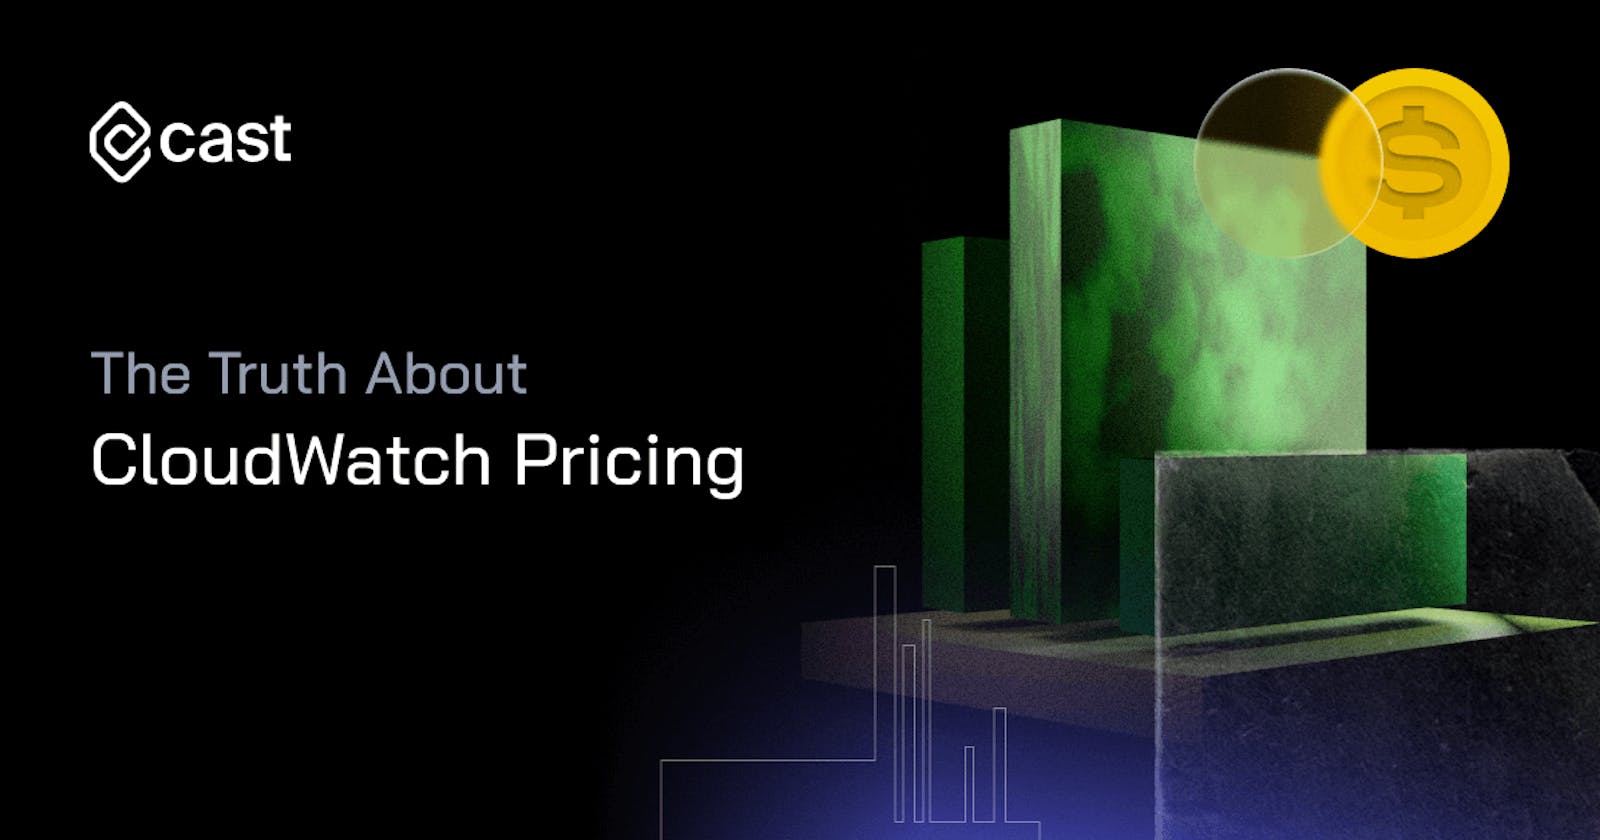 The Truth About CloudWatch Pricing